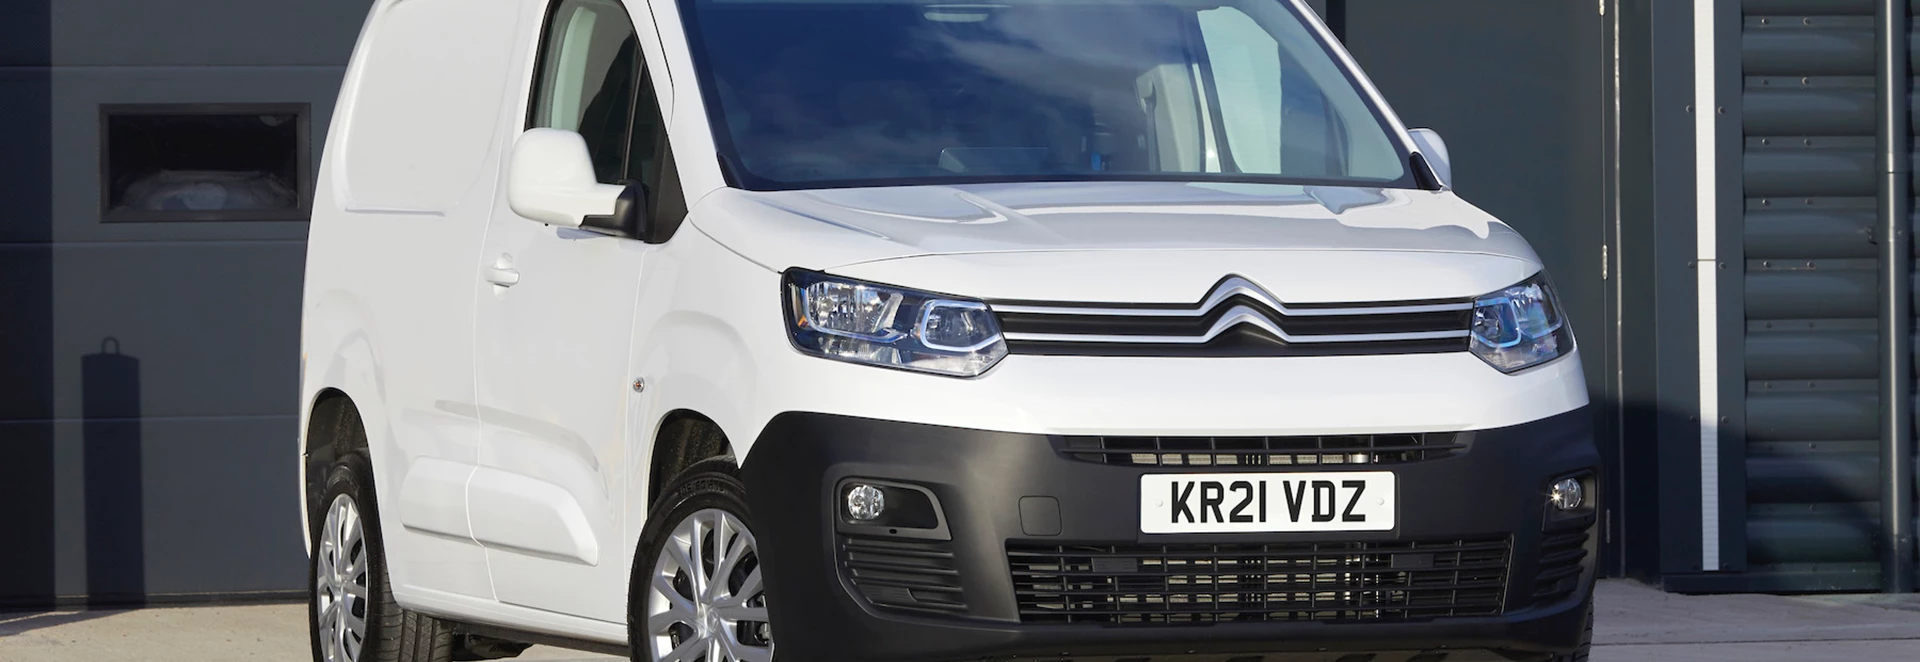 New Peugeot and Citroen vans to come with free telematics software 